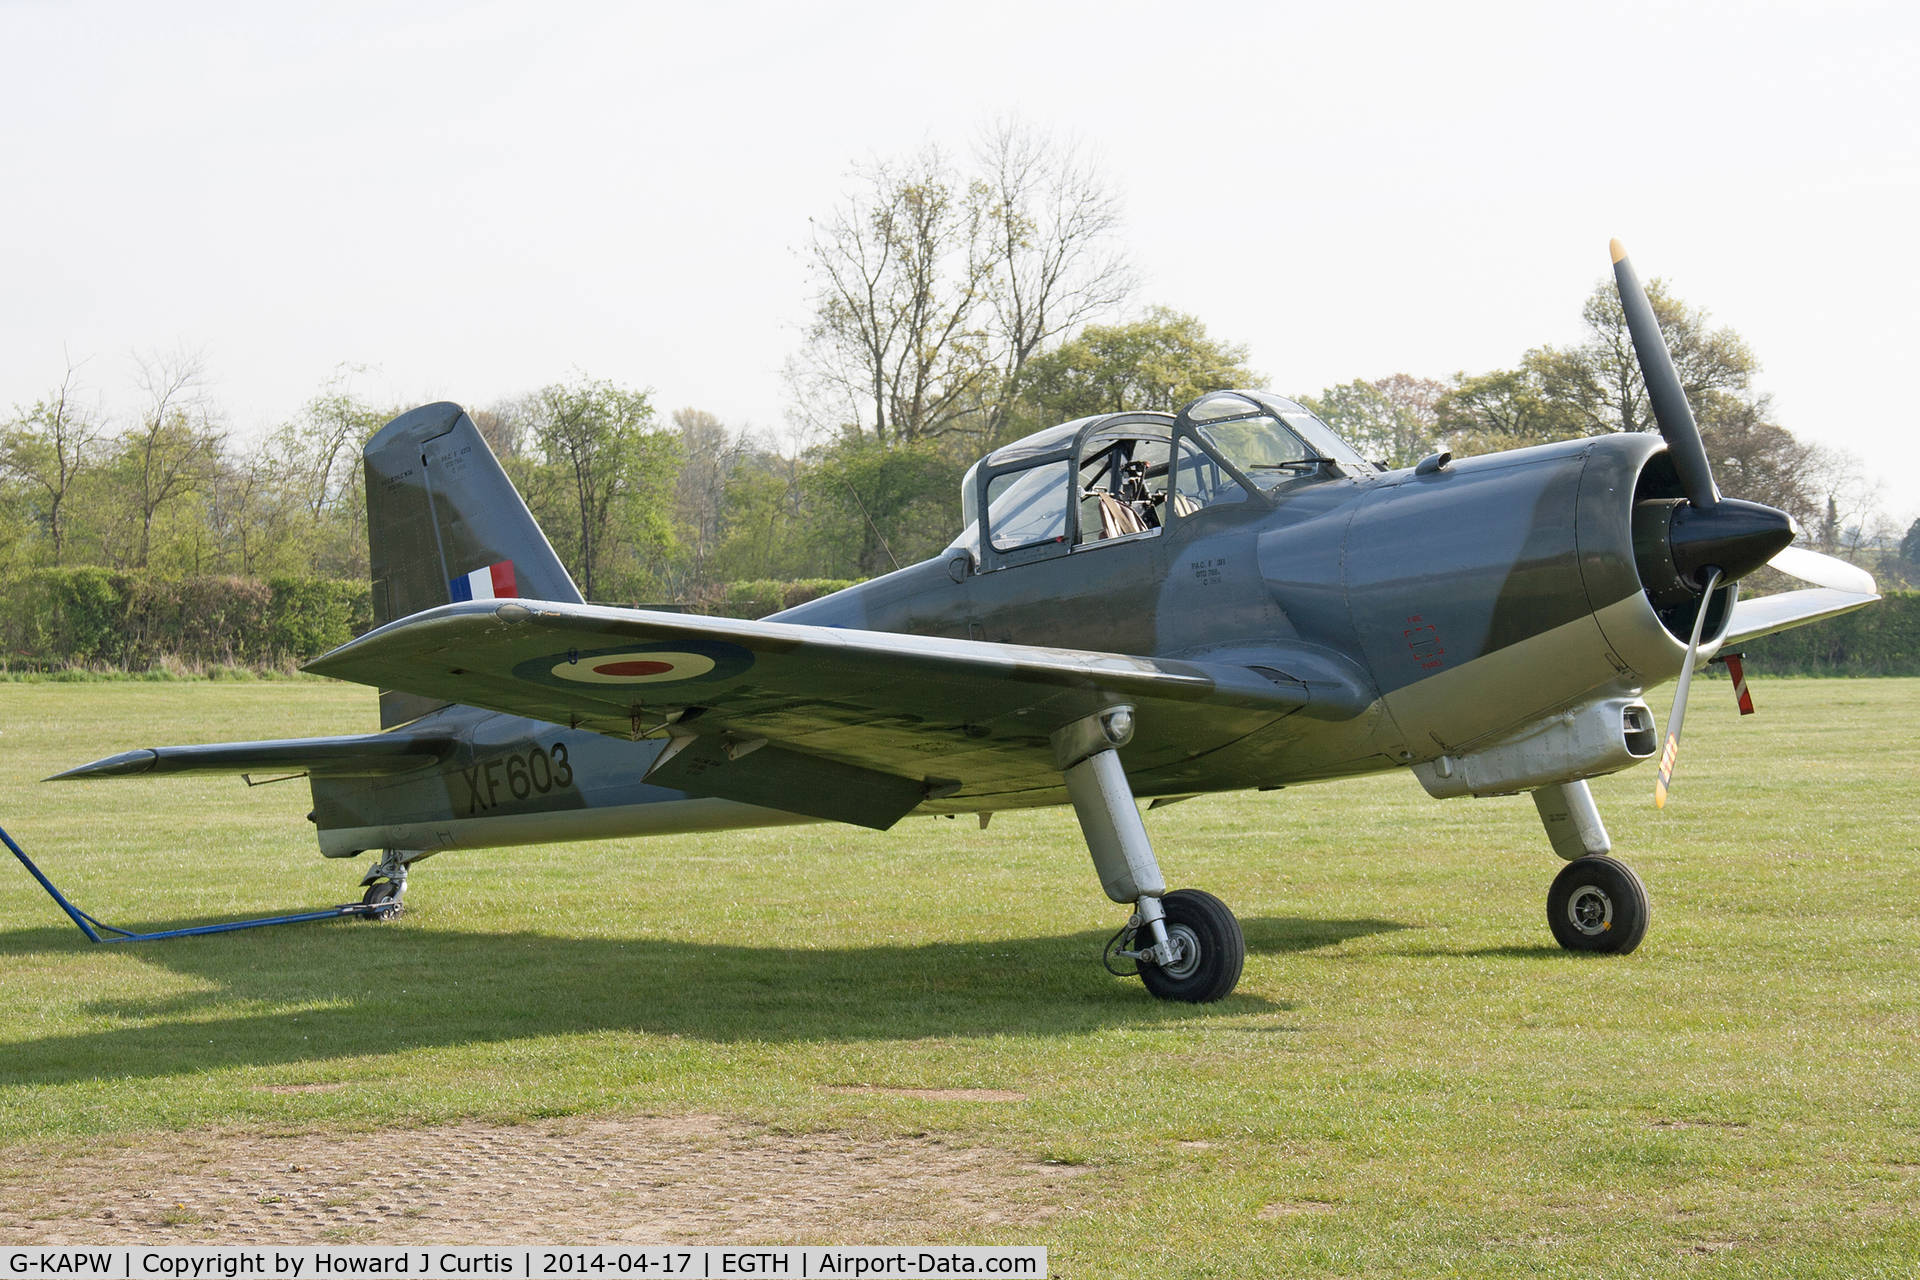 G-KAPW, 1955 Percival P-56 Provost T.1 C/N PAC/56/311, Shuttleworth Trust, painted as XF603